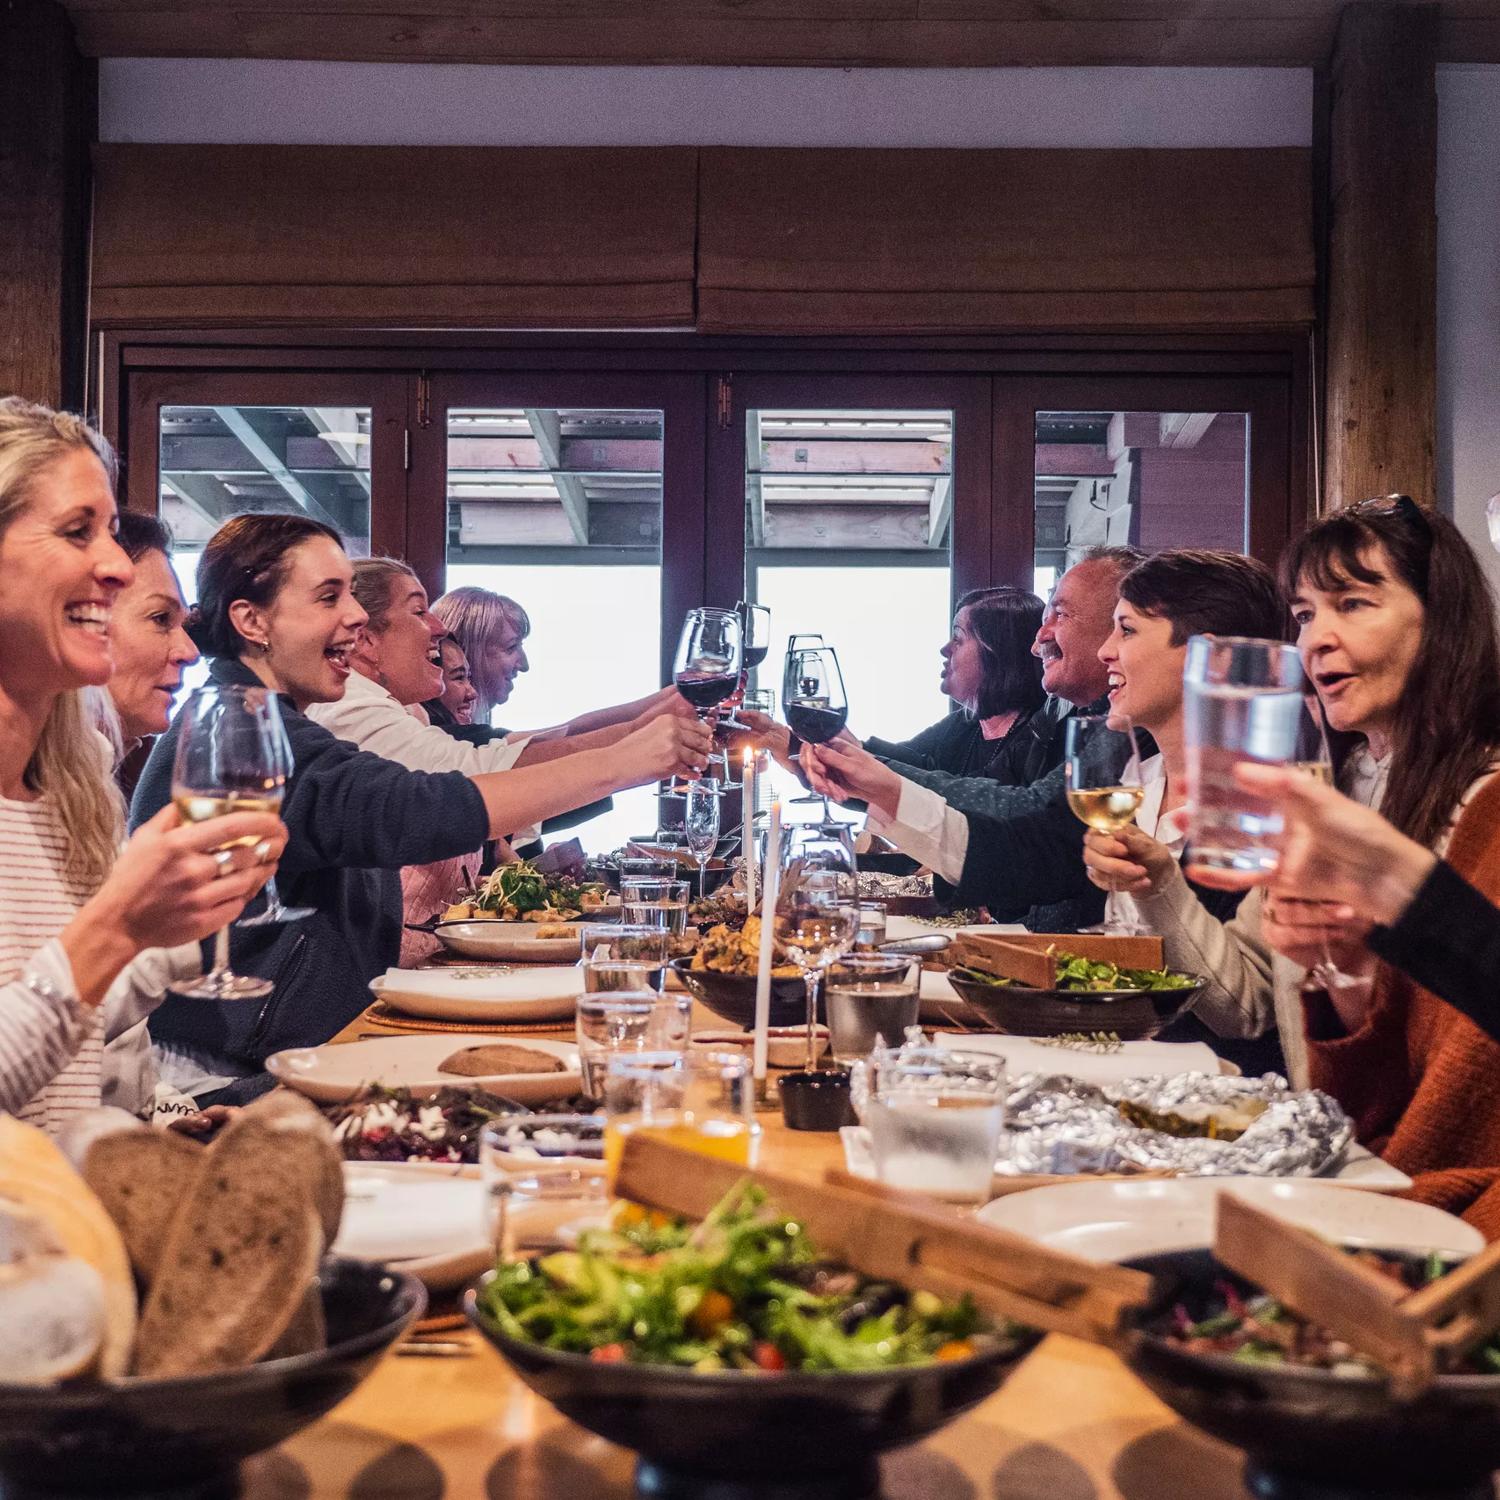 Ten people are enjoying a dinner together, clinking their wine glasses at Boomrock, a function and event venue located in Ohariu, Wellington.